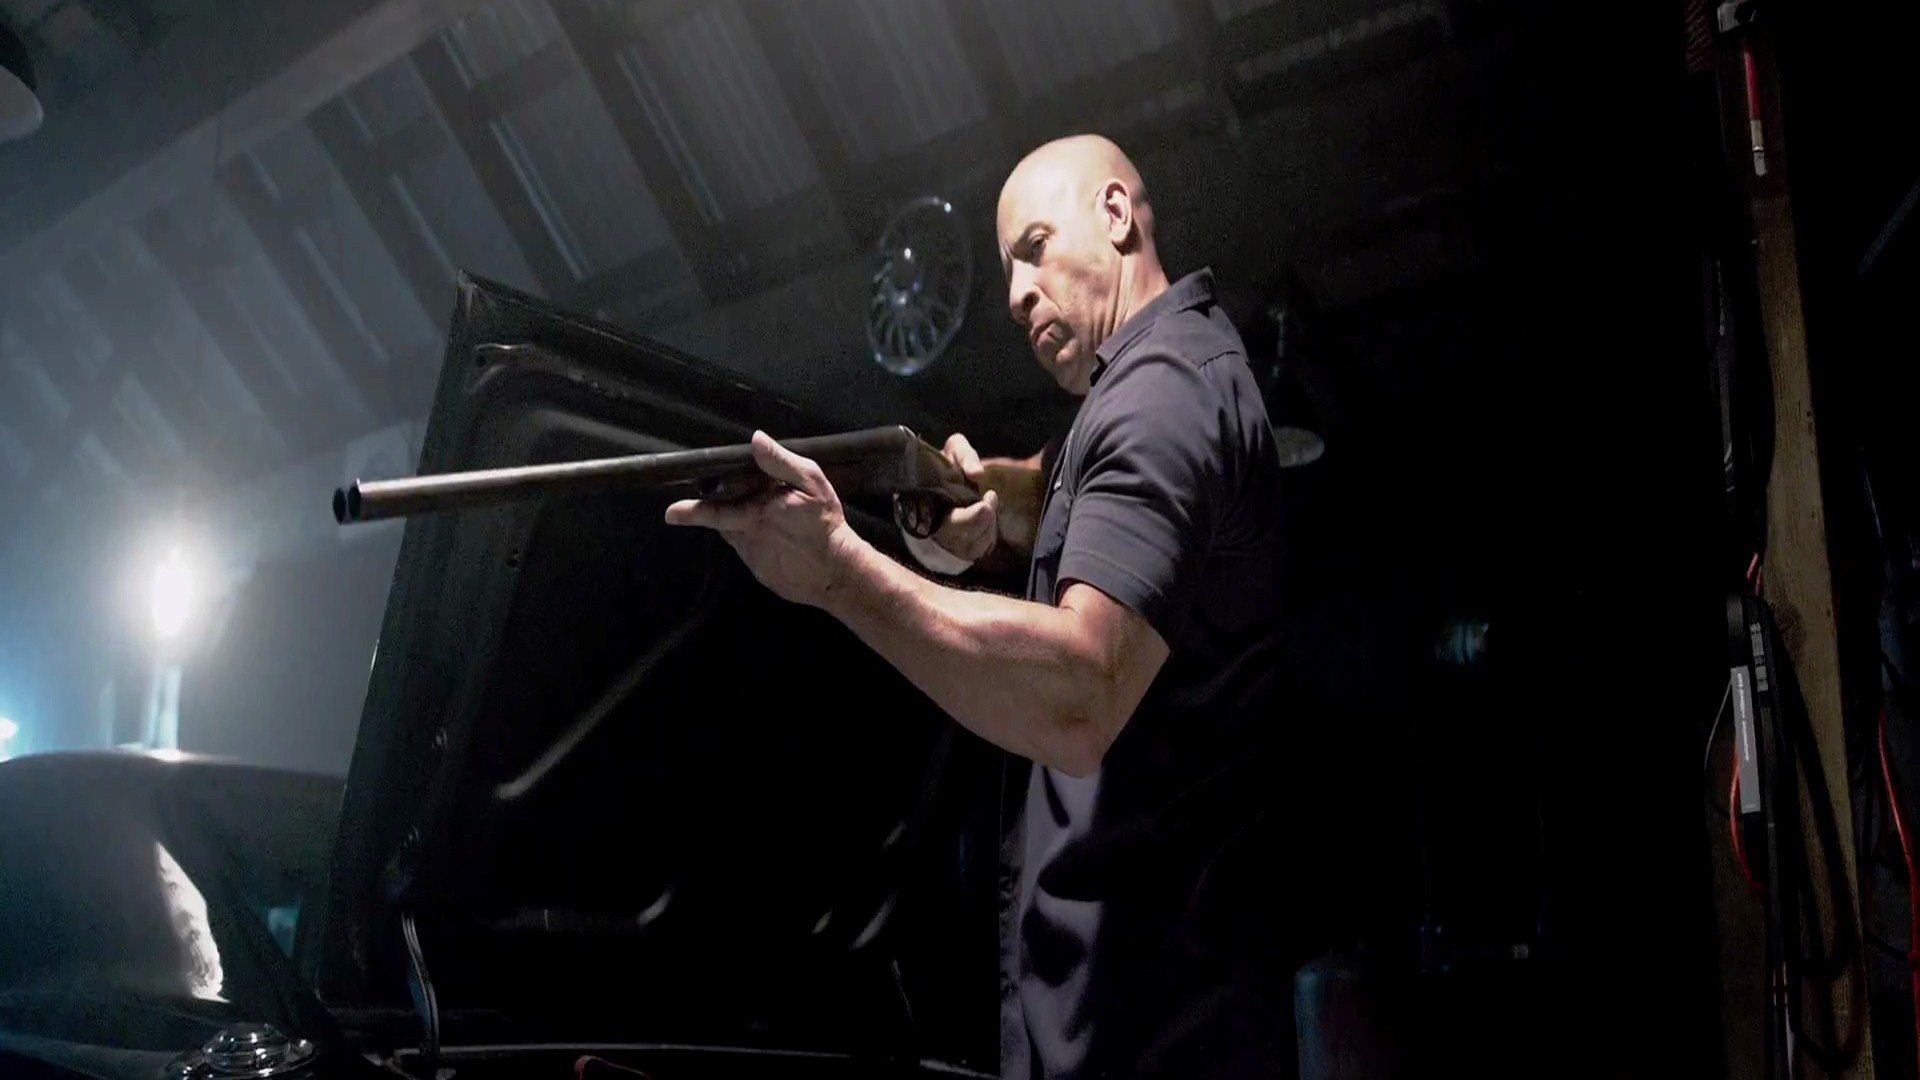 Vin Diesel With Gun In English Movie Fast And Furious HD Wallpaper